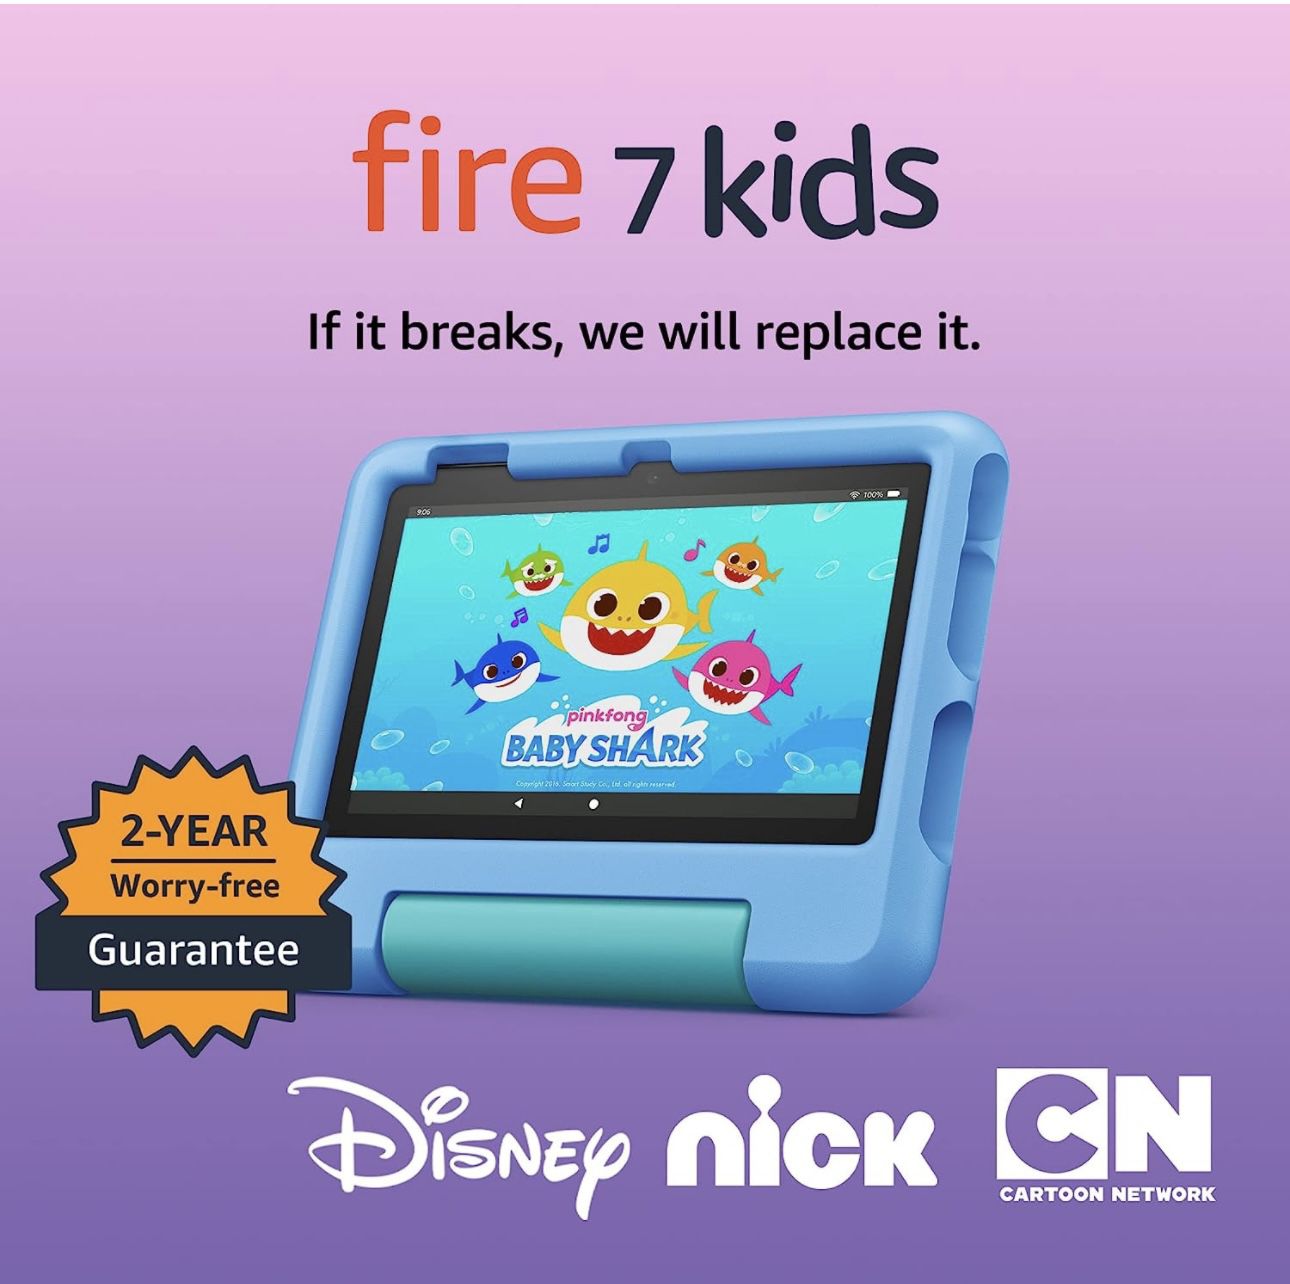 Amazon Fire 7 Kids tablet, ages 3-7. Top-selling 7" kids tablet on Amazon - 2022 | ad-free content with parental controls included, 10-hr battery, 16 